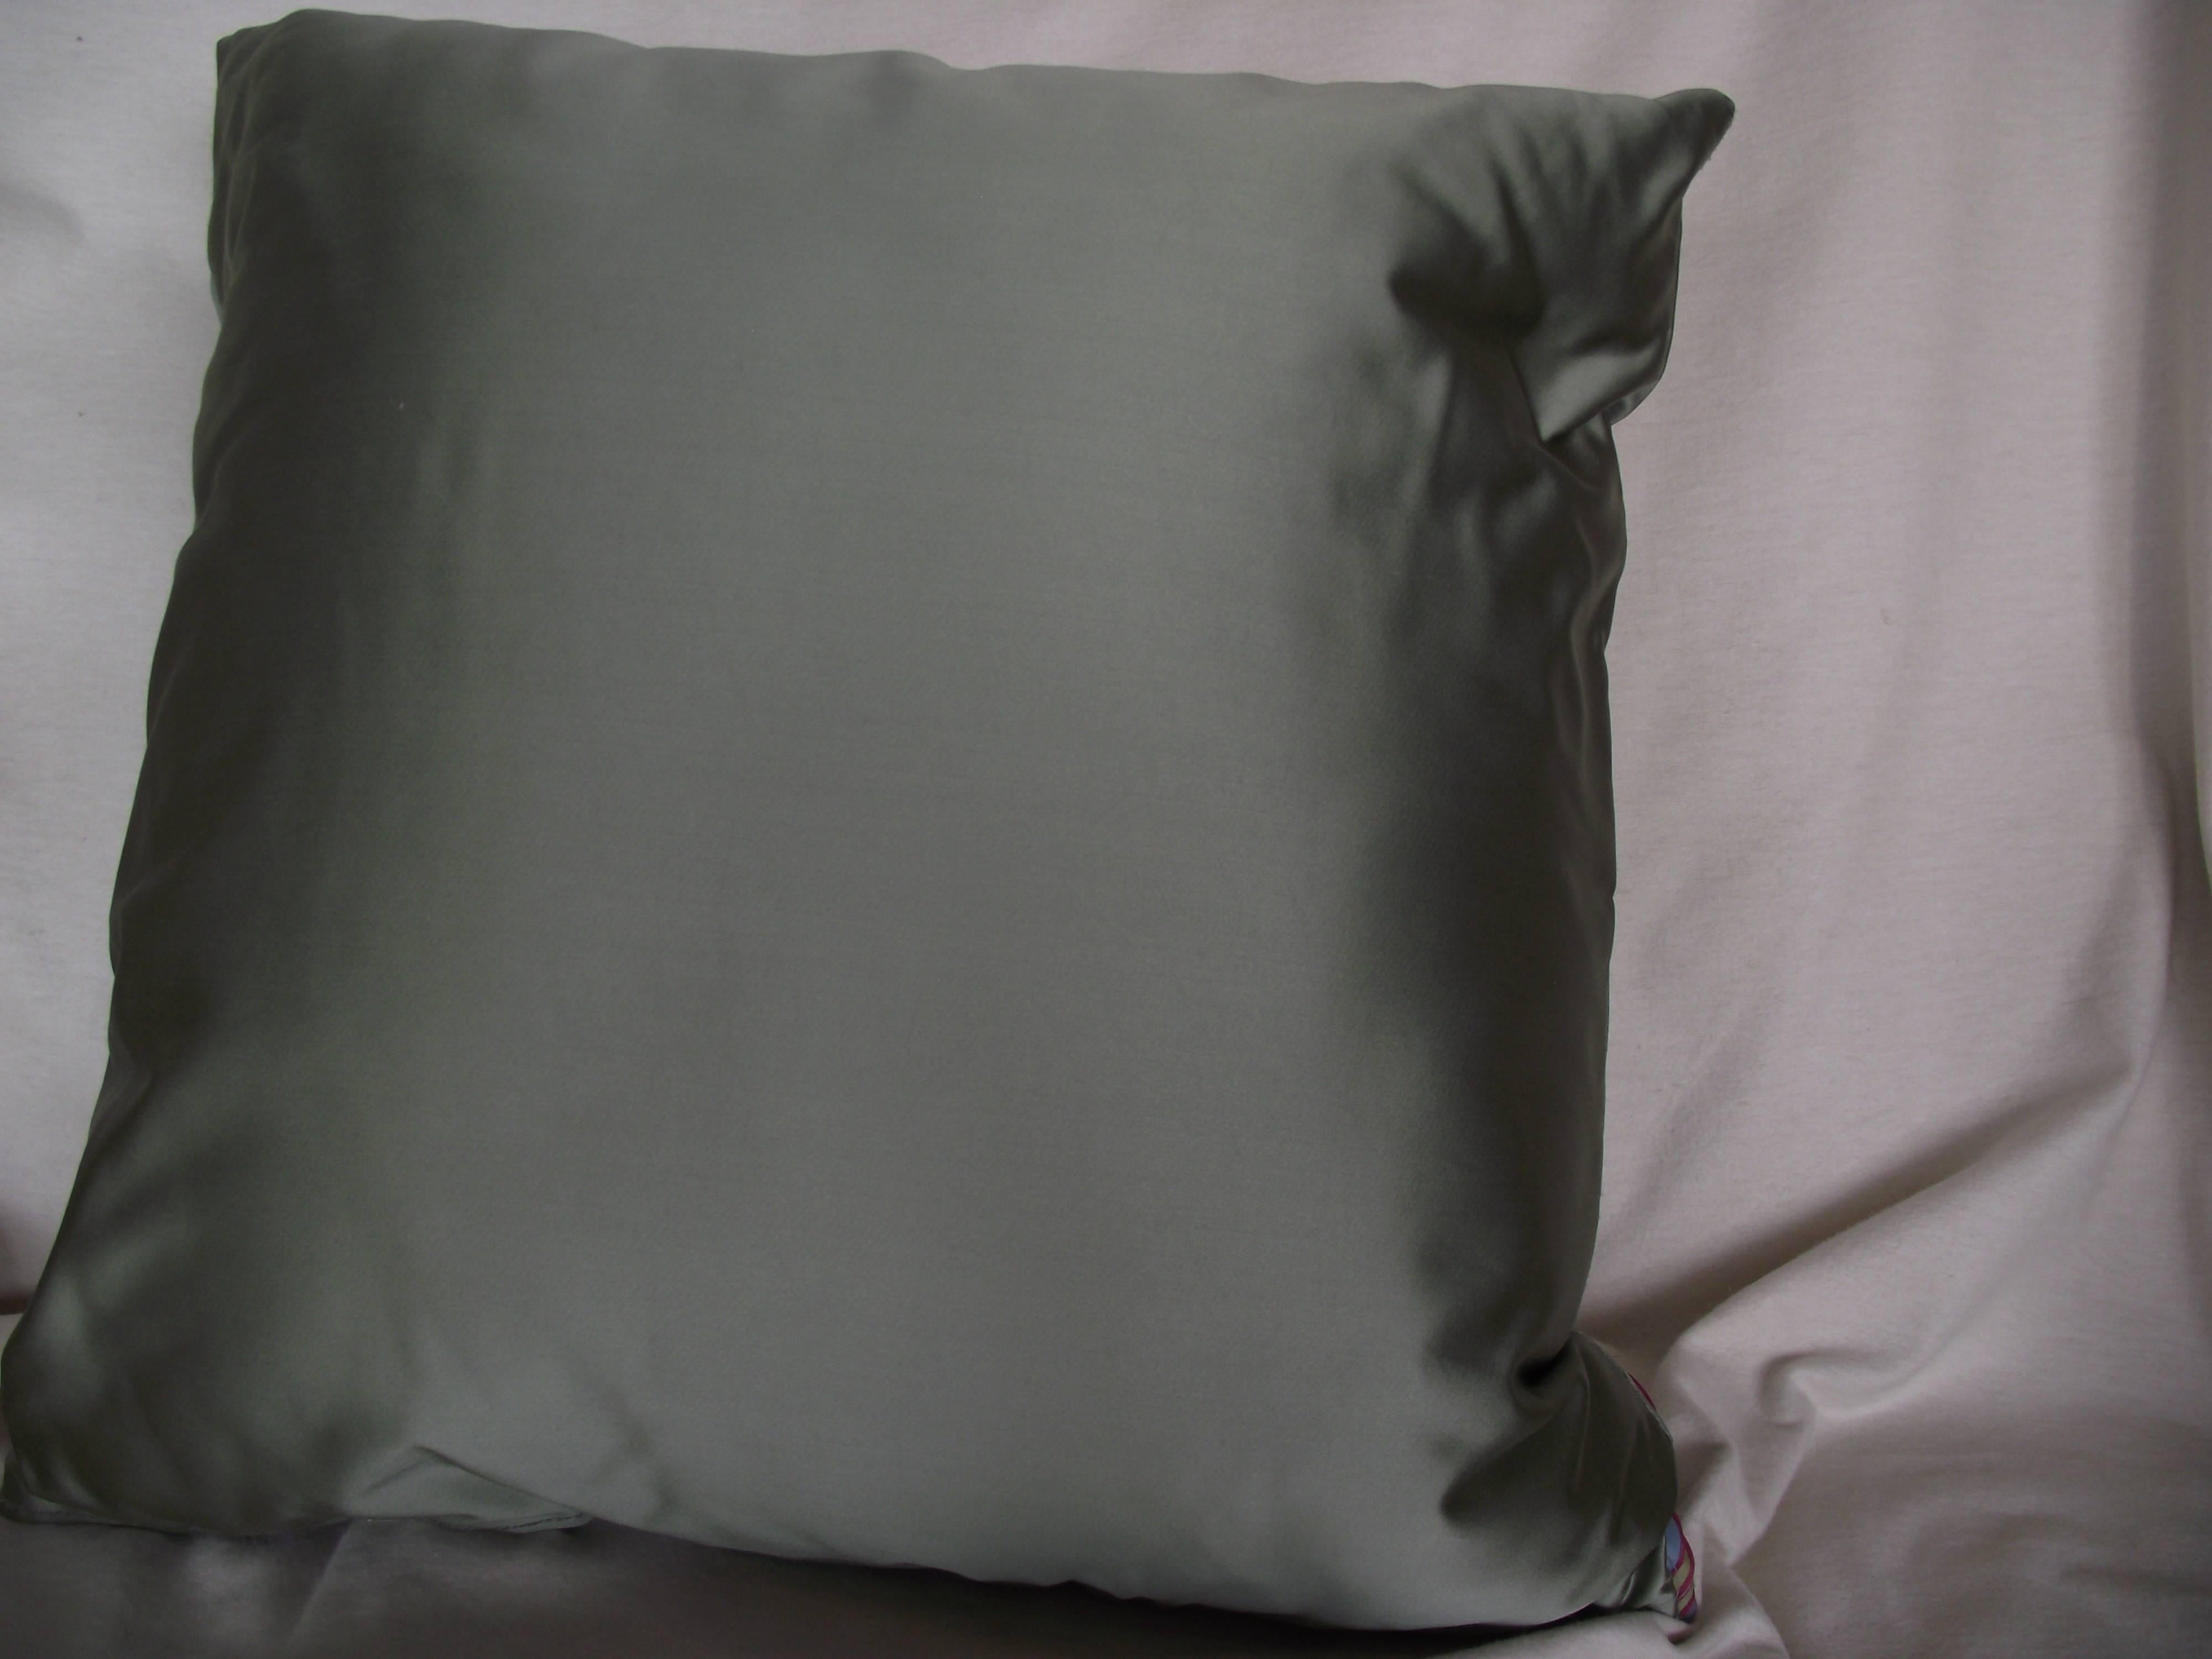 This original design by Gantt is handmade of soft shades of greyed out green satin and a fresh colored blue satin. 

Each color stripe is set off with a 1/16" red cord adding color and texture to this unusual pillow.

This is a comfort